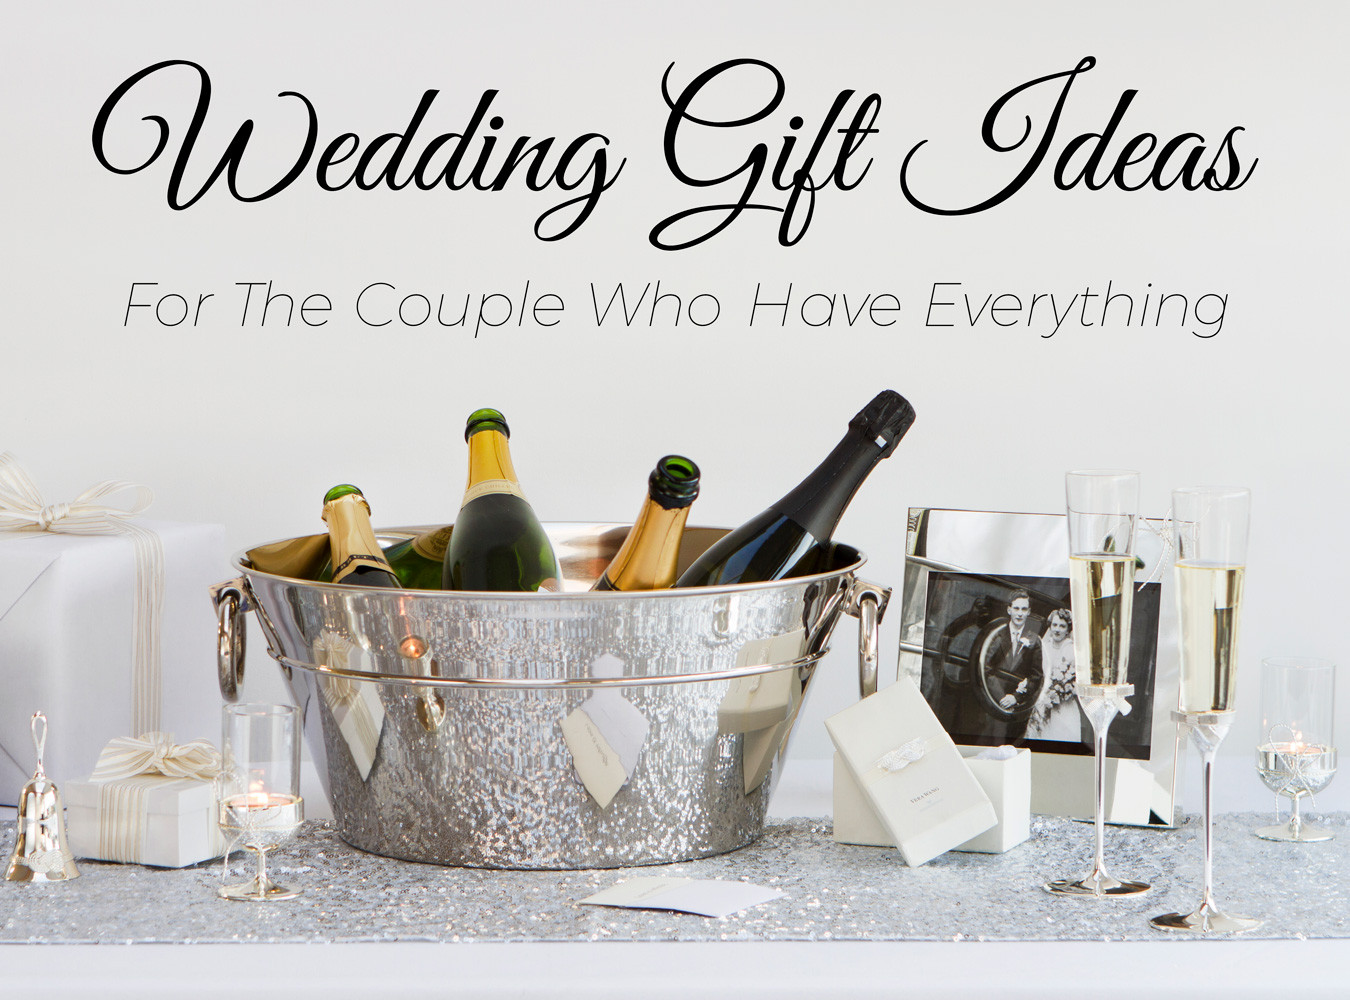 Wedding Gift Ideas For Second Marriage Older Couple
 5 Wedding Gift Ideas for the Couple Who Have Everything